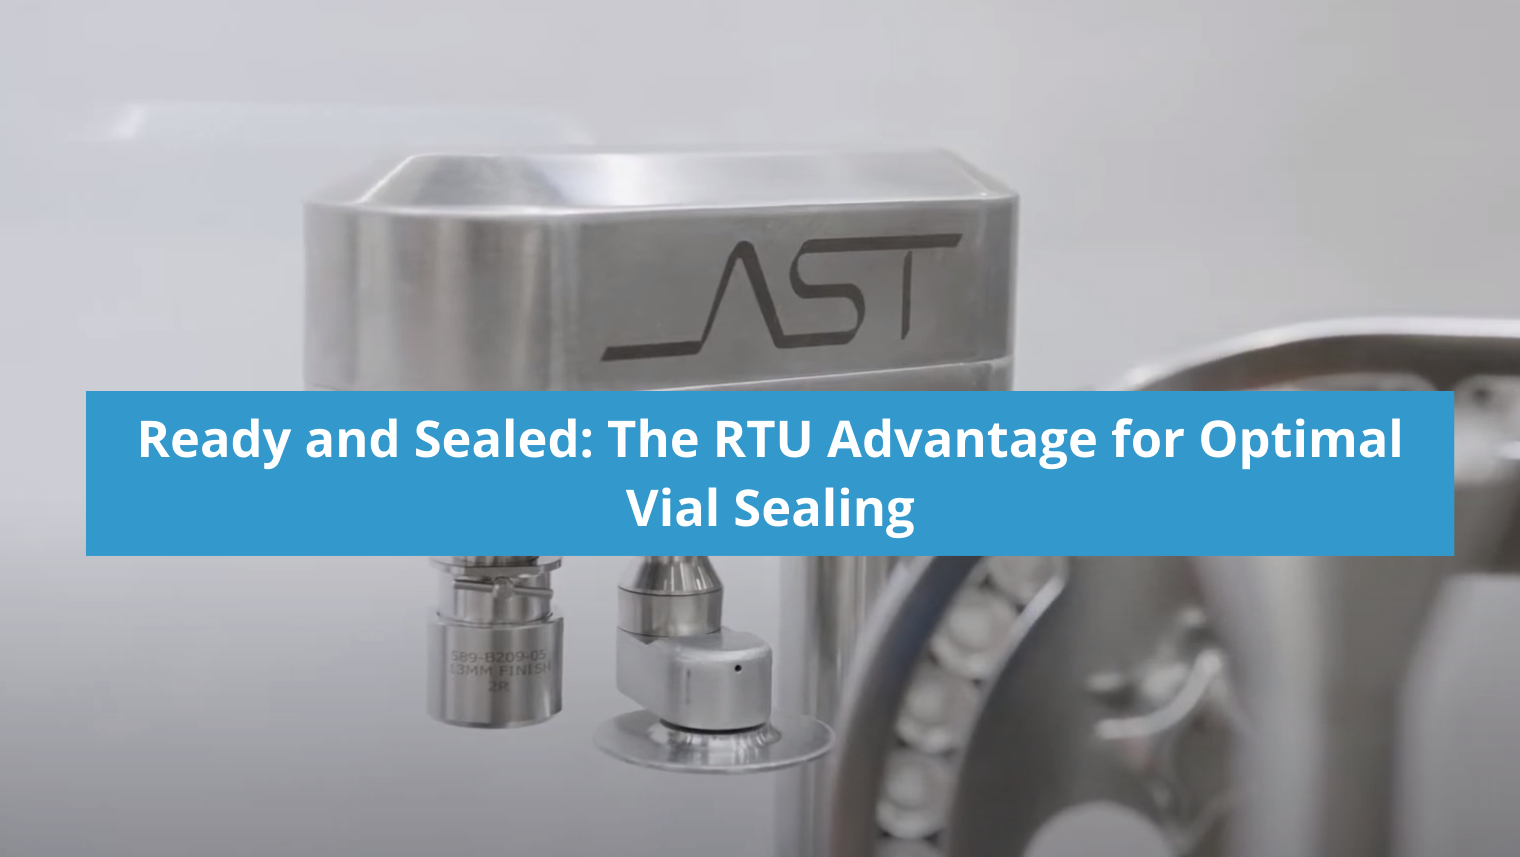 AST aseptic vial sealing robotic machinery in a life sciences cleanroom